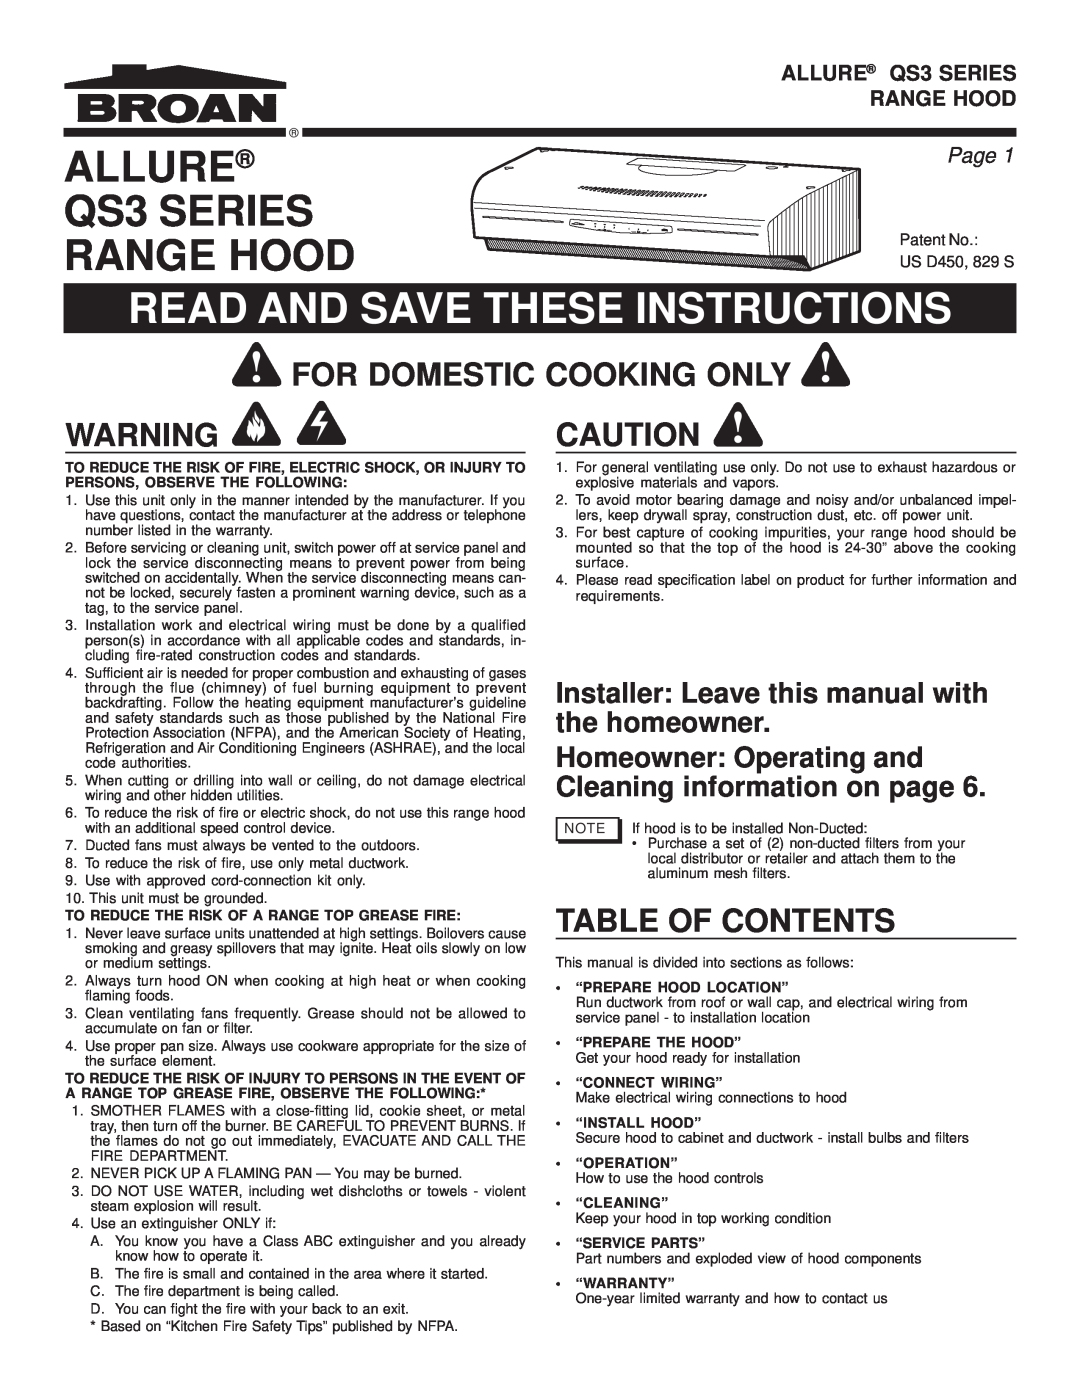 Broan warranty Read And Save These Instructions, Table Of Contents, ALLURE QS3 SERIES RANGE HOOD, Page 